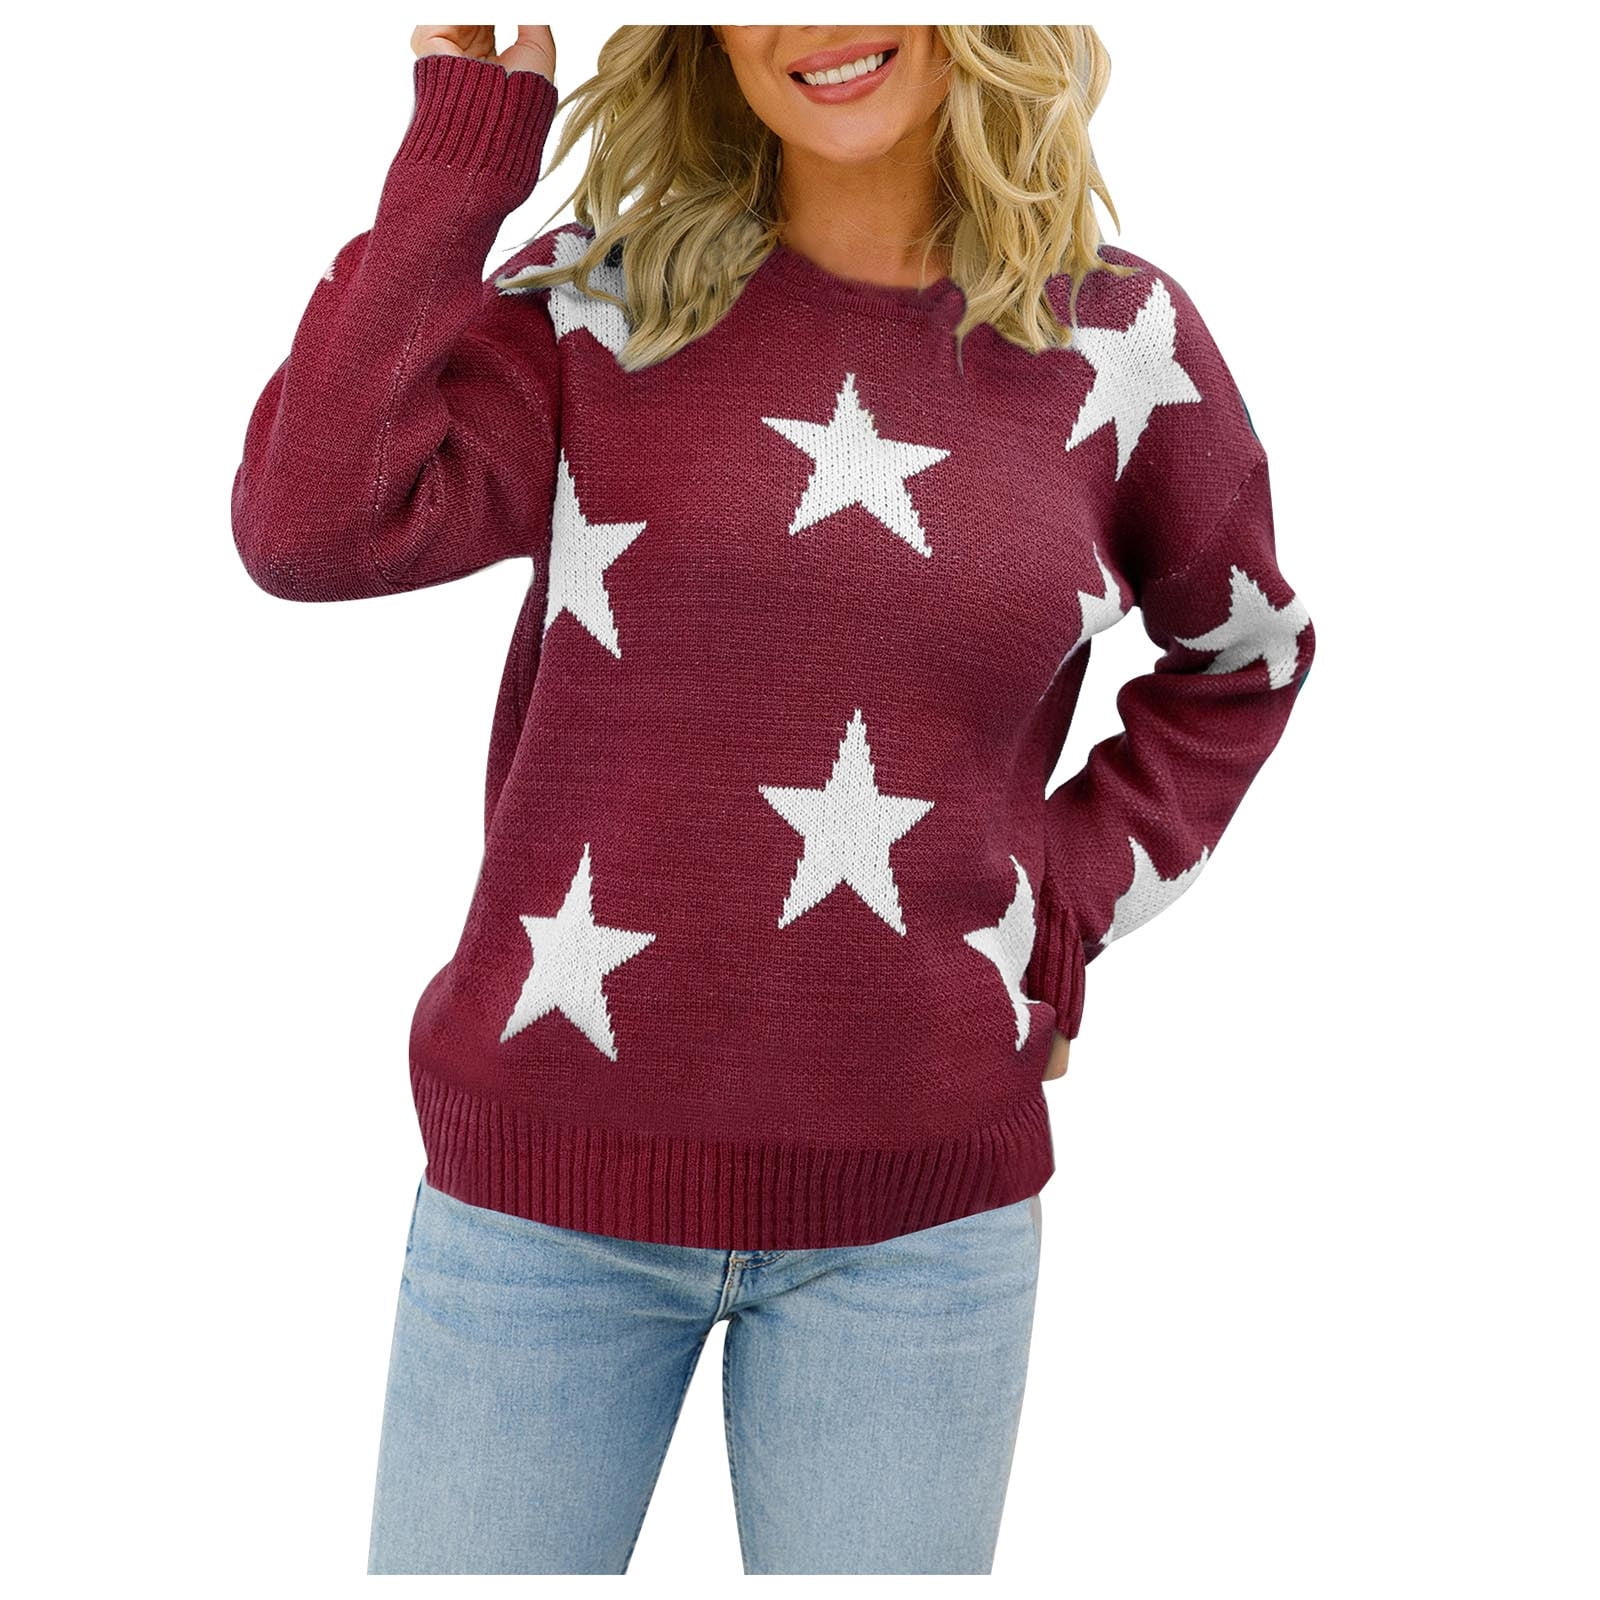 Fesfesfes Women Sweater Tops V-neck Loose Knitting Sweater Casual Stars  Pattern Long Sleeve Tops Clothes Sale 